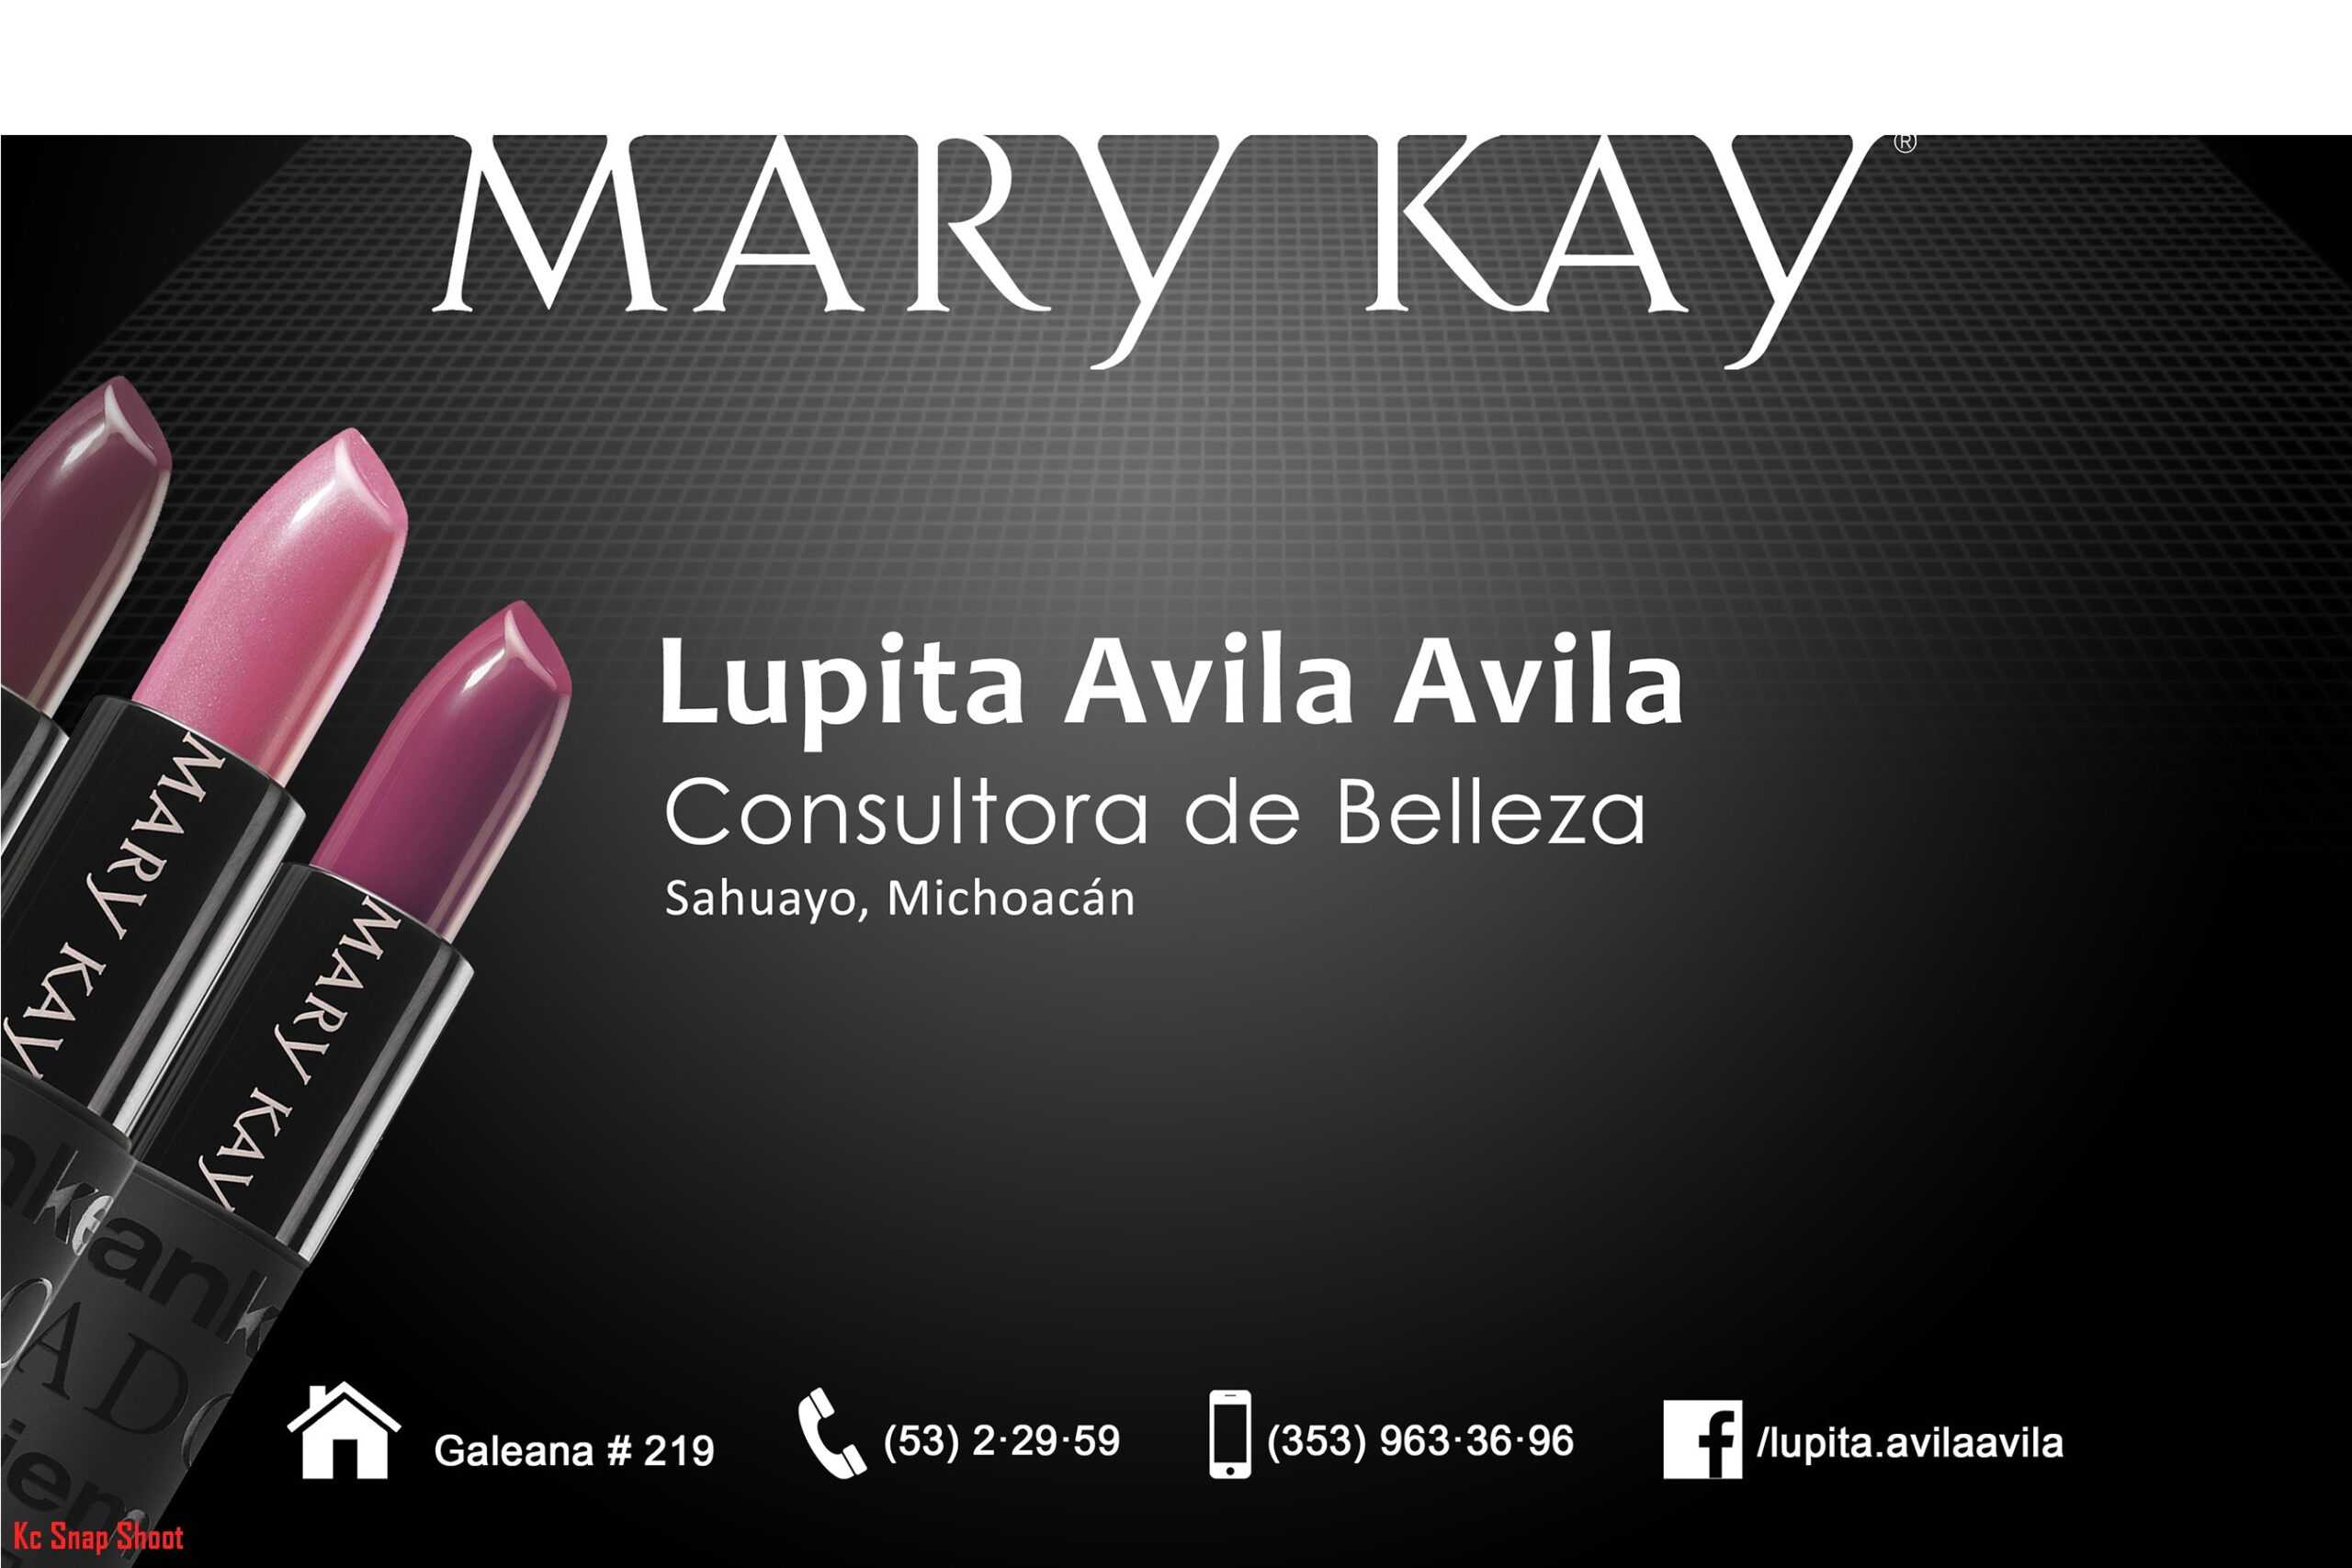 69+ Mary Kay Wallpapers On Wallpaperplay Intended For Mary Kay Business Cards Templates Free